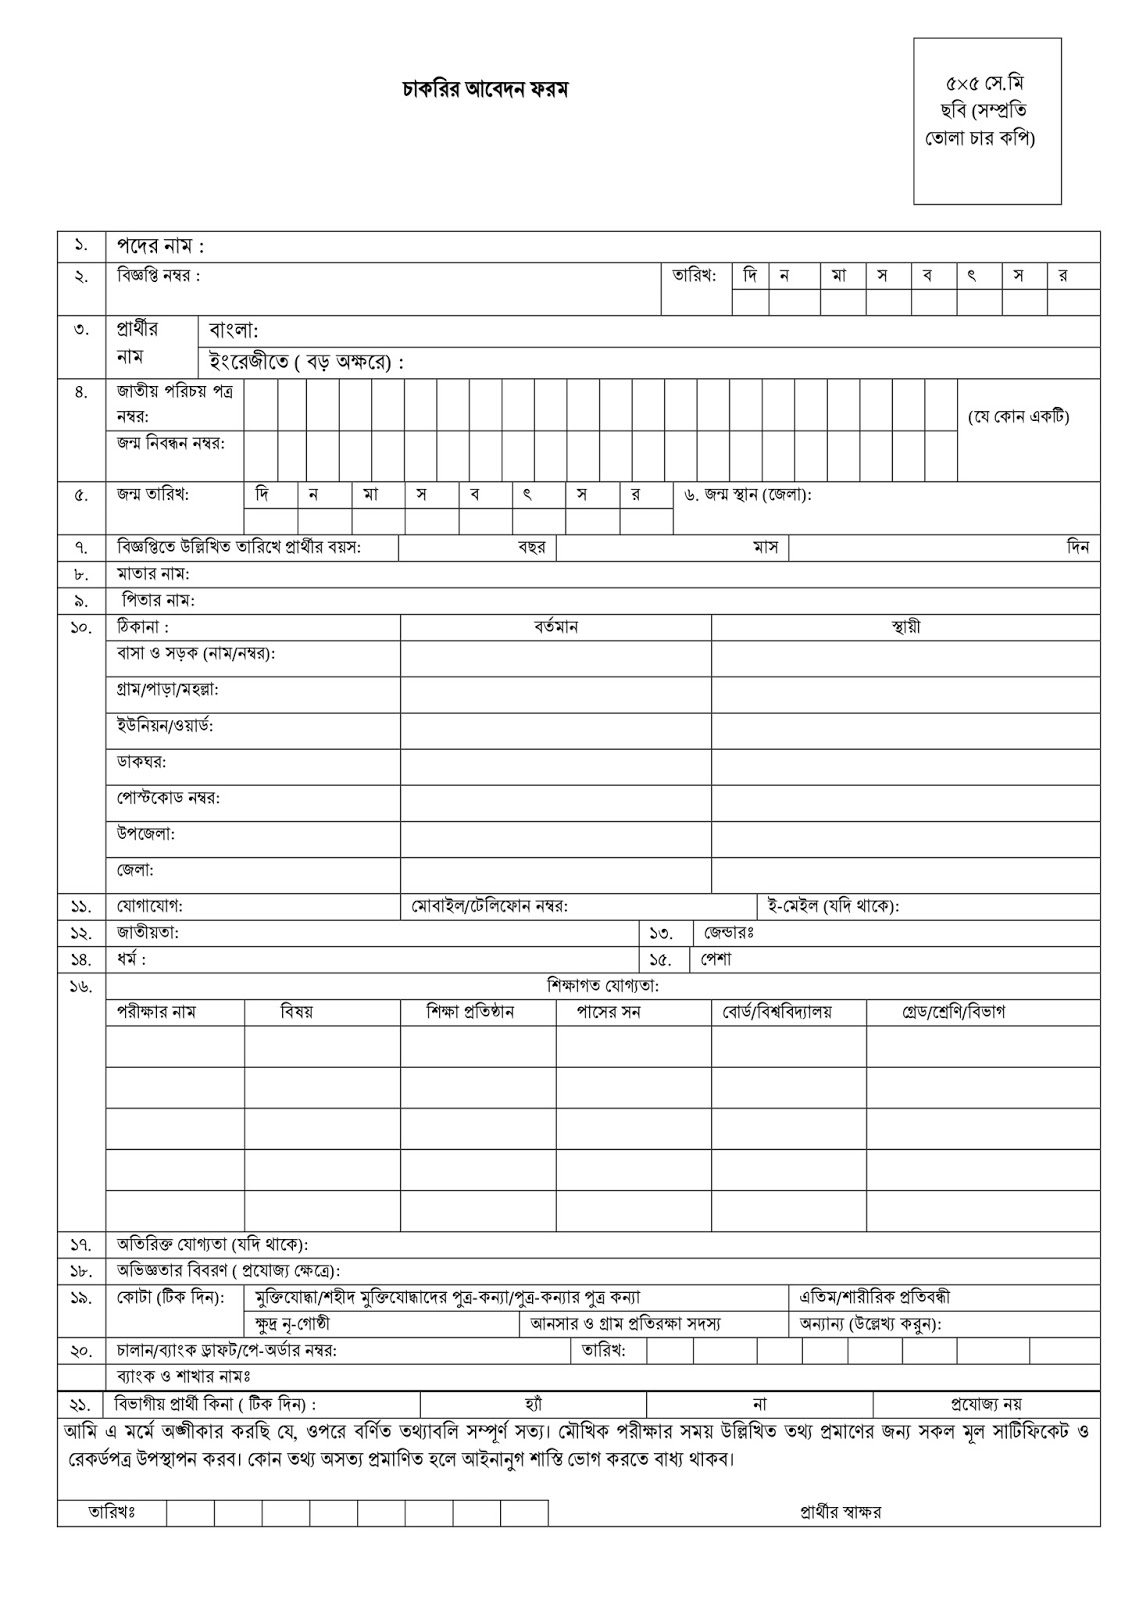 Ministry of Religious Affairs  Application Form